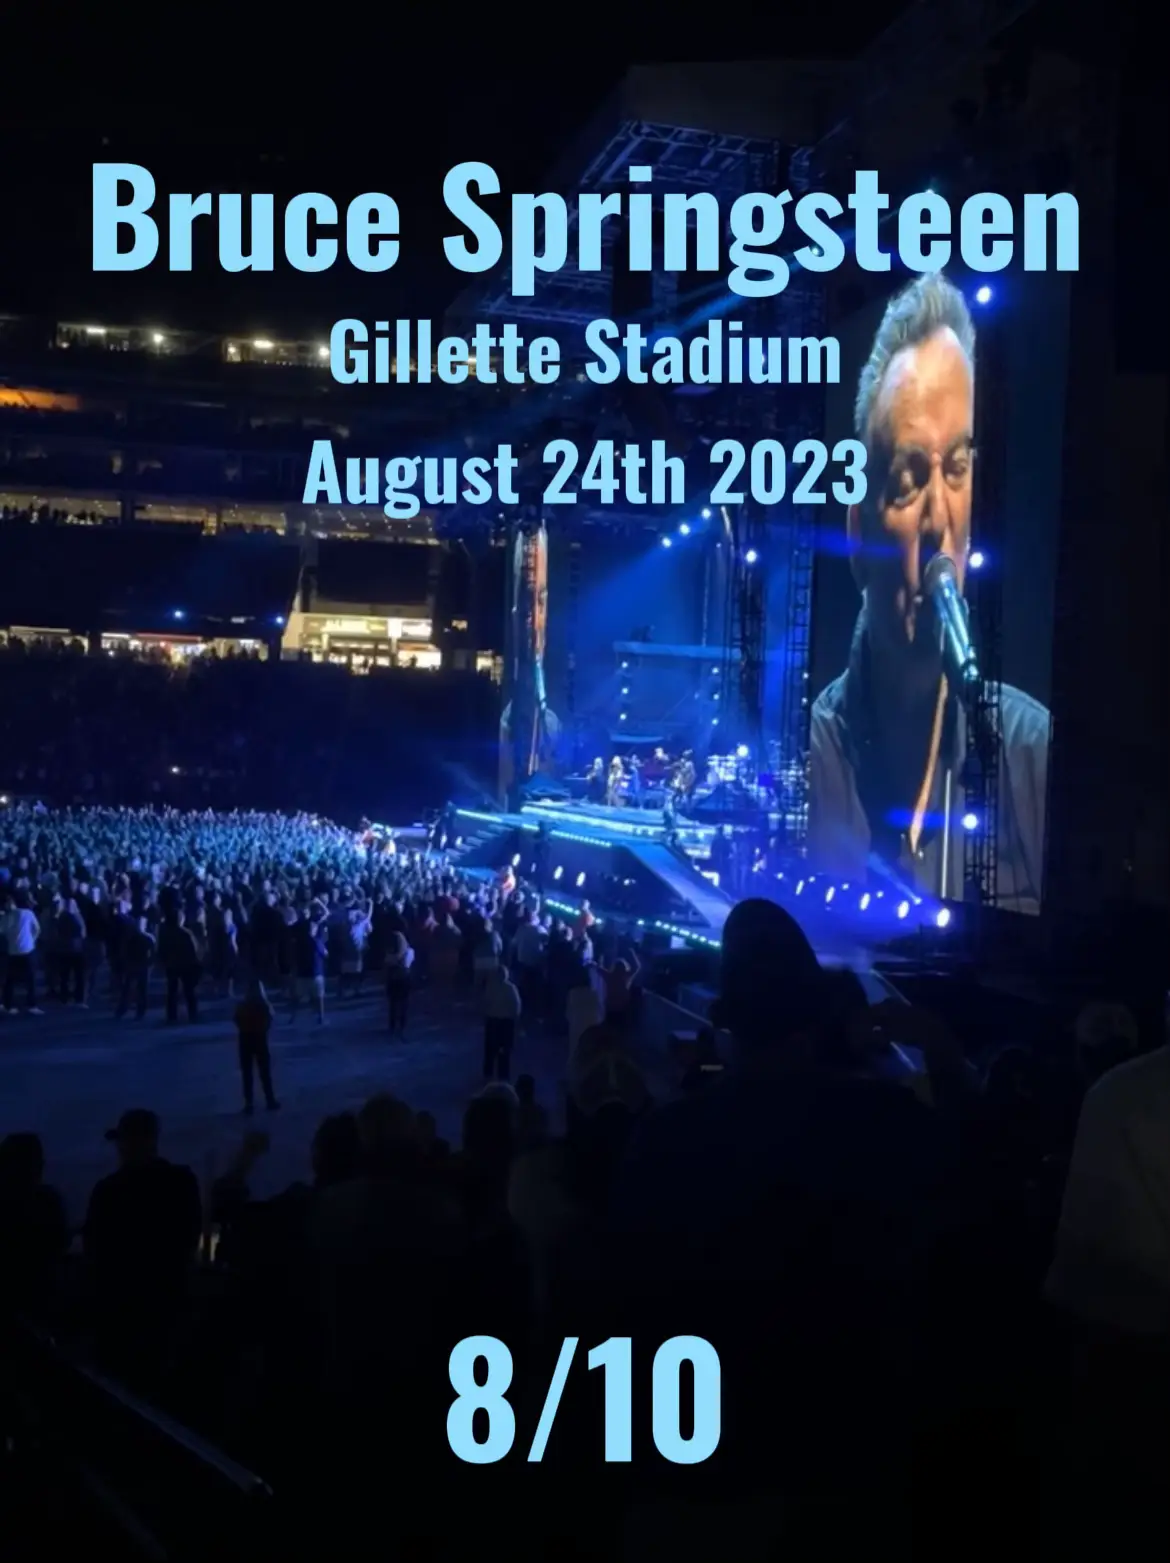  Bruce Springsteen is performing at the Gillette Stadium in August 2023.